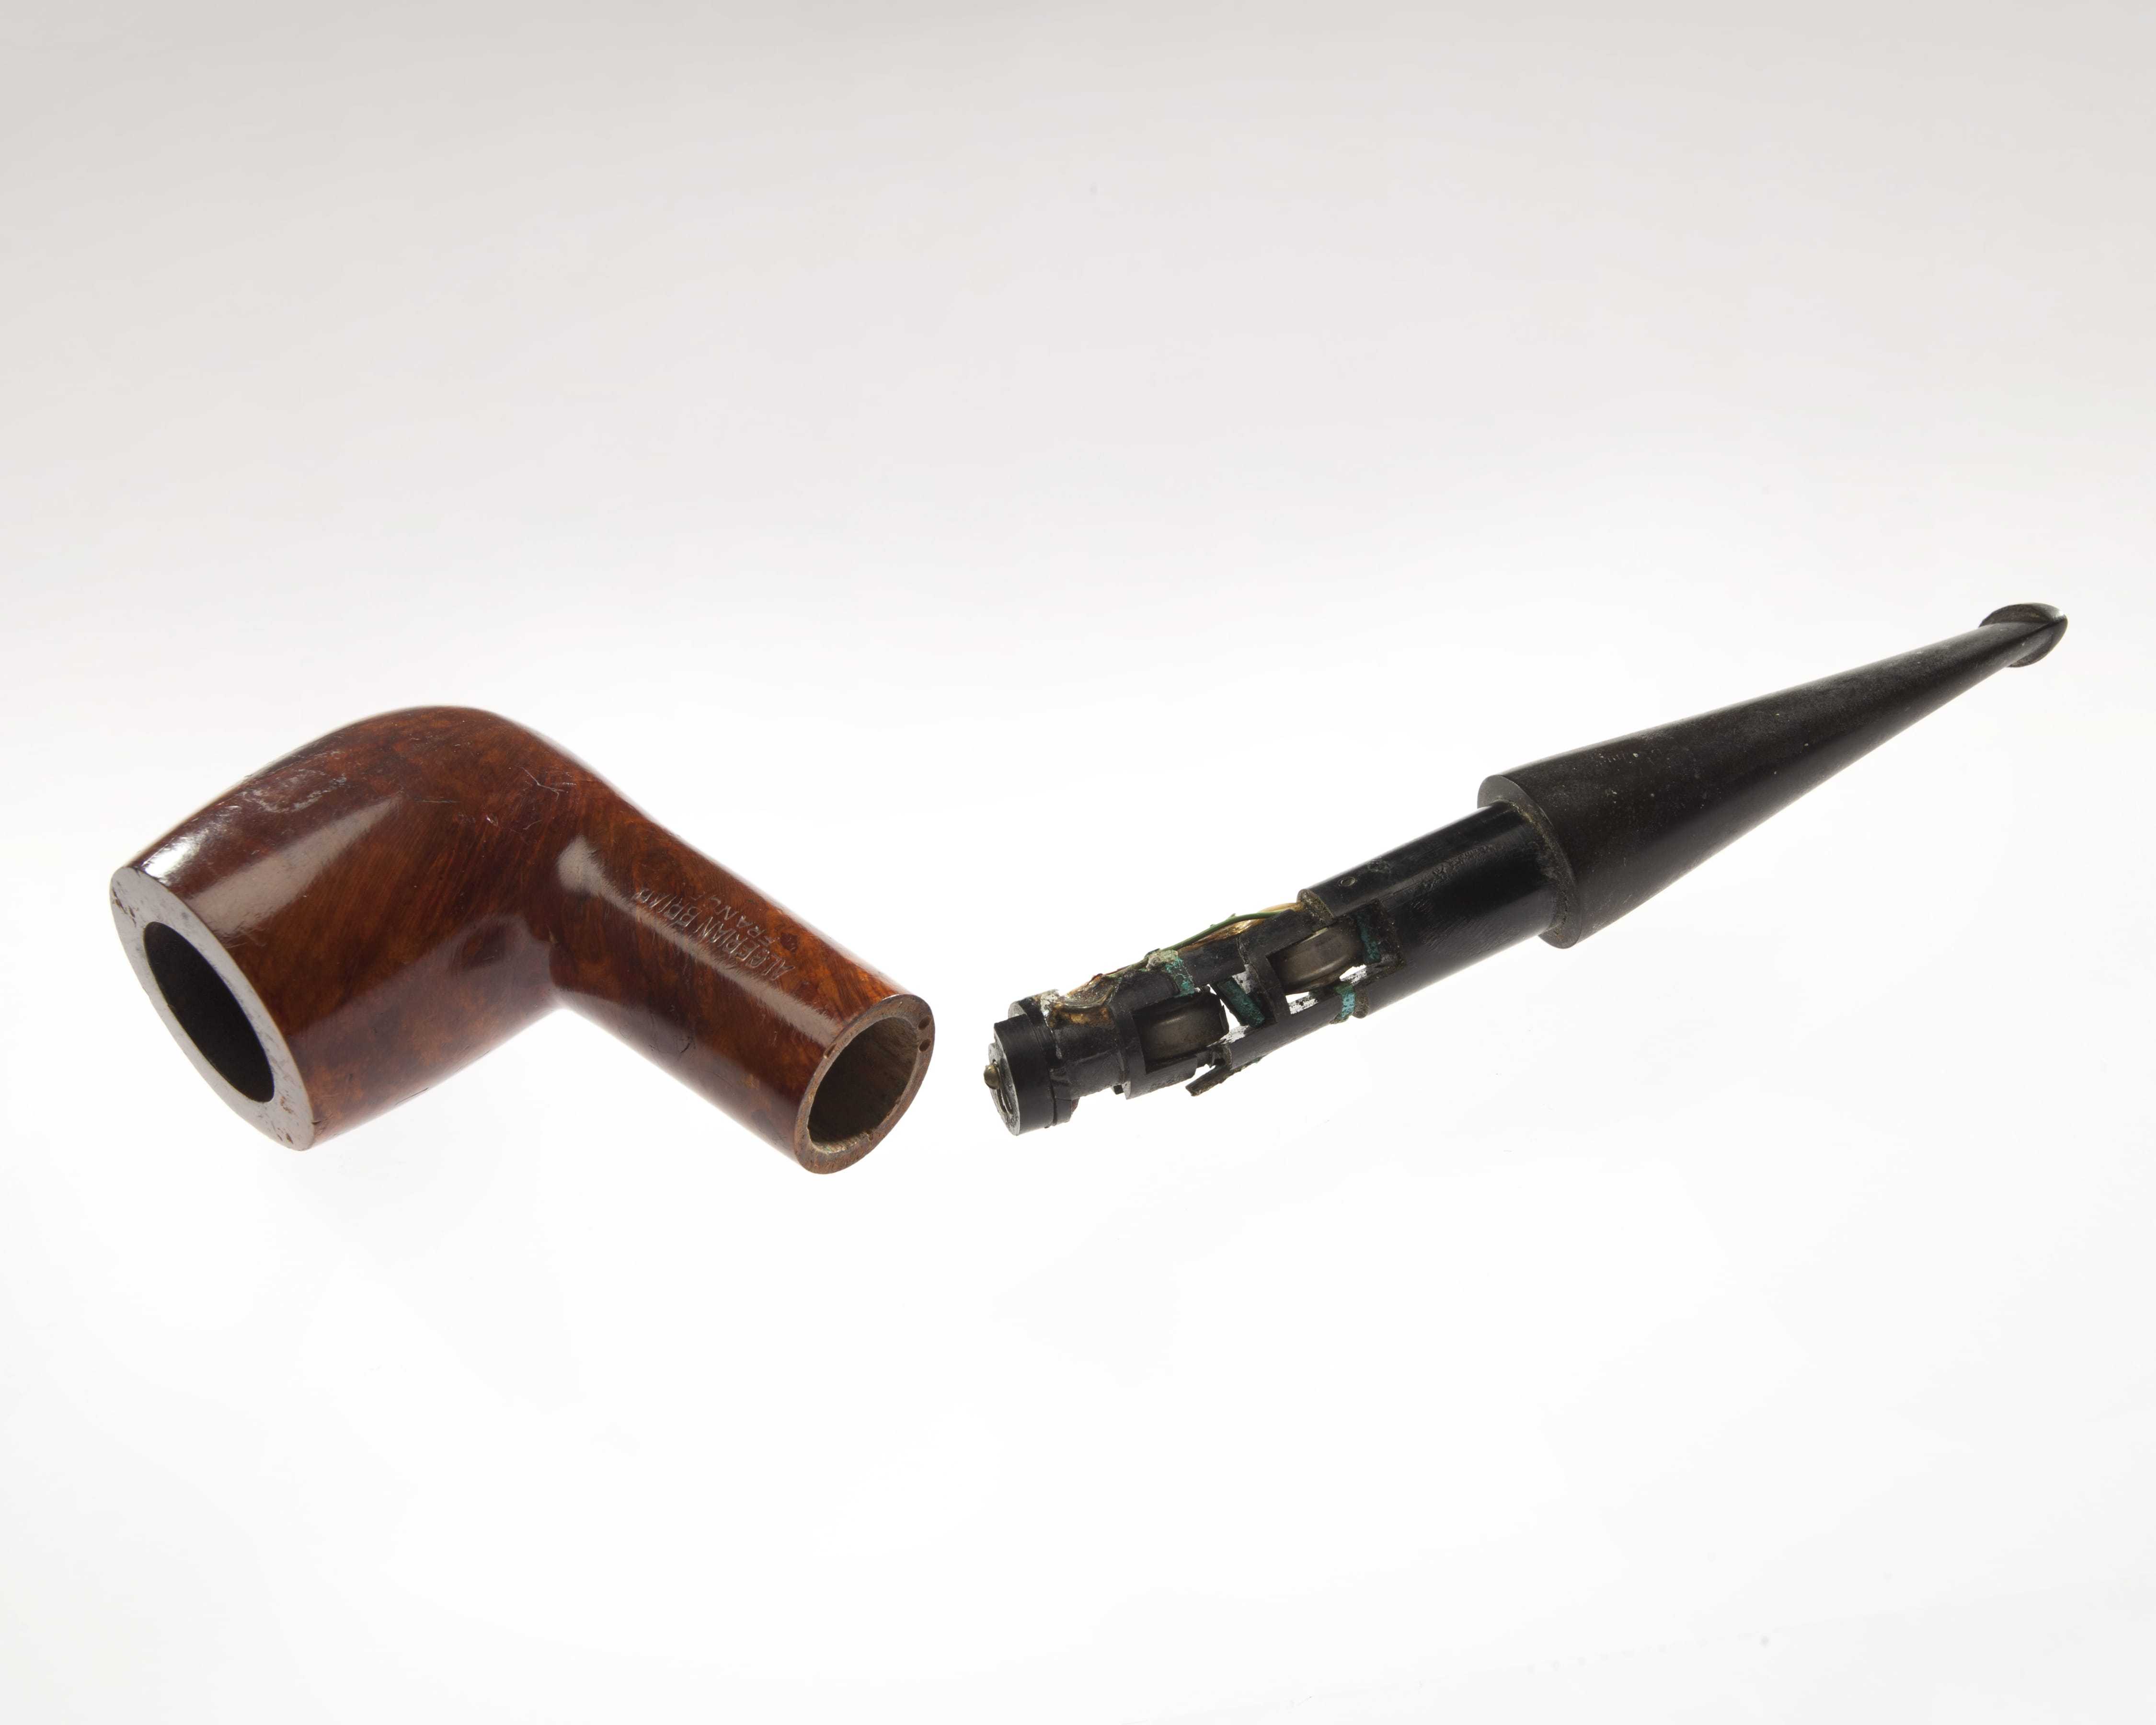 A pipe separated in the middle to reveal a small radio receiver concealed inside